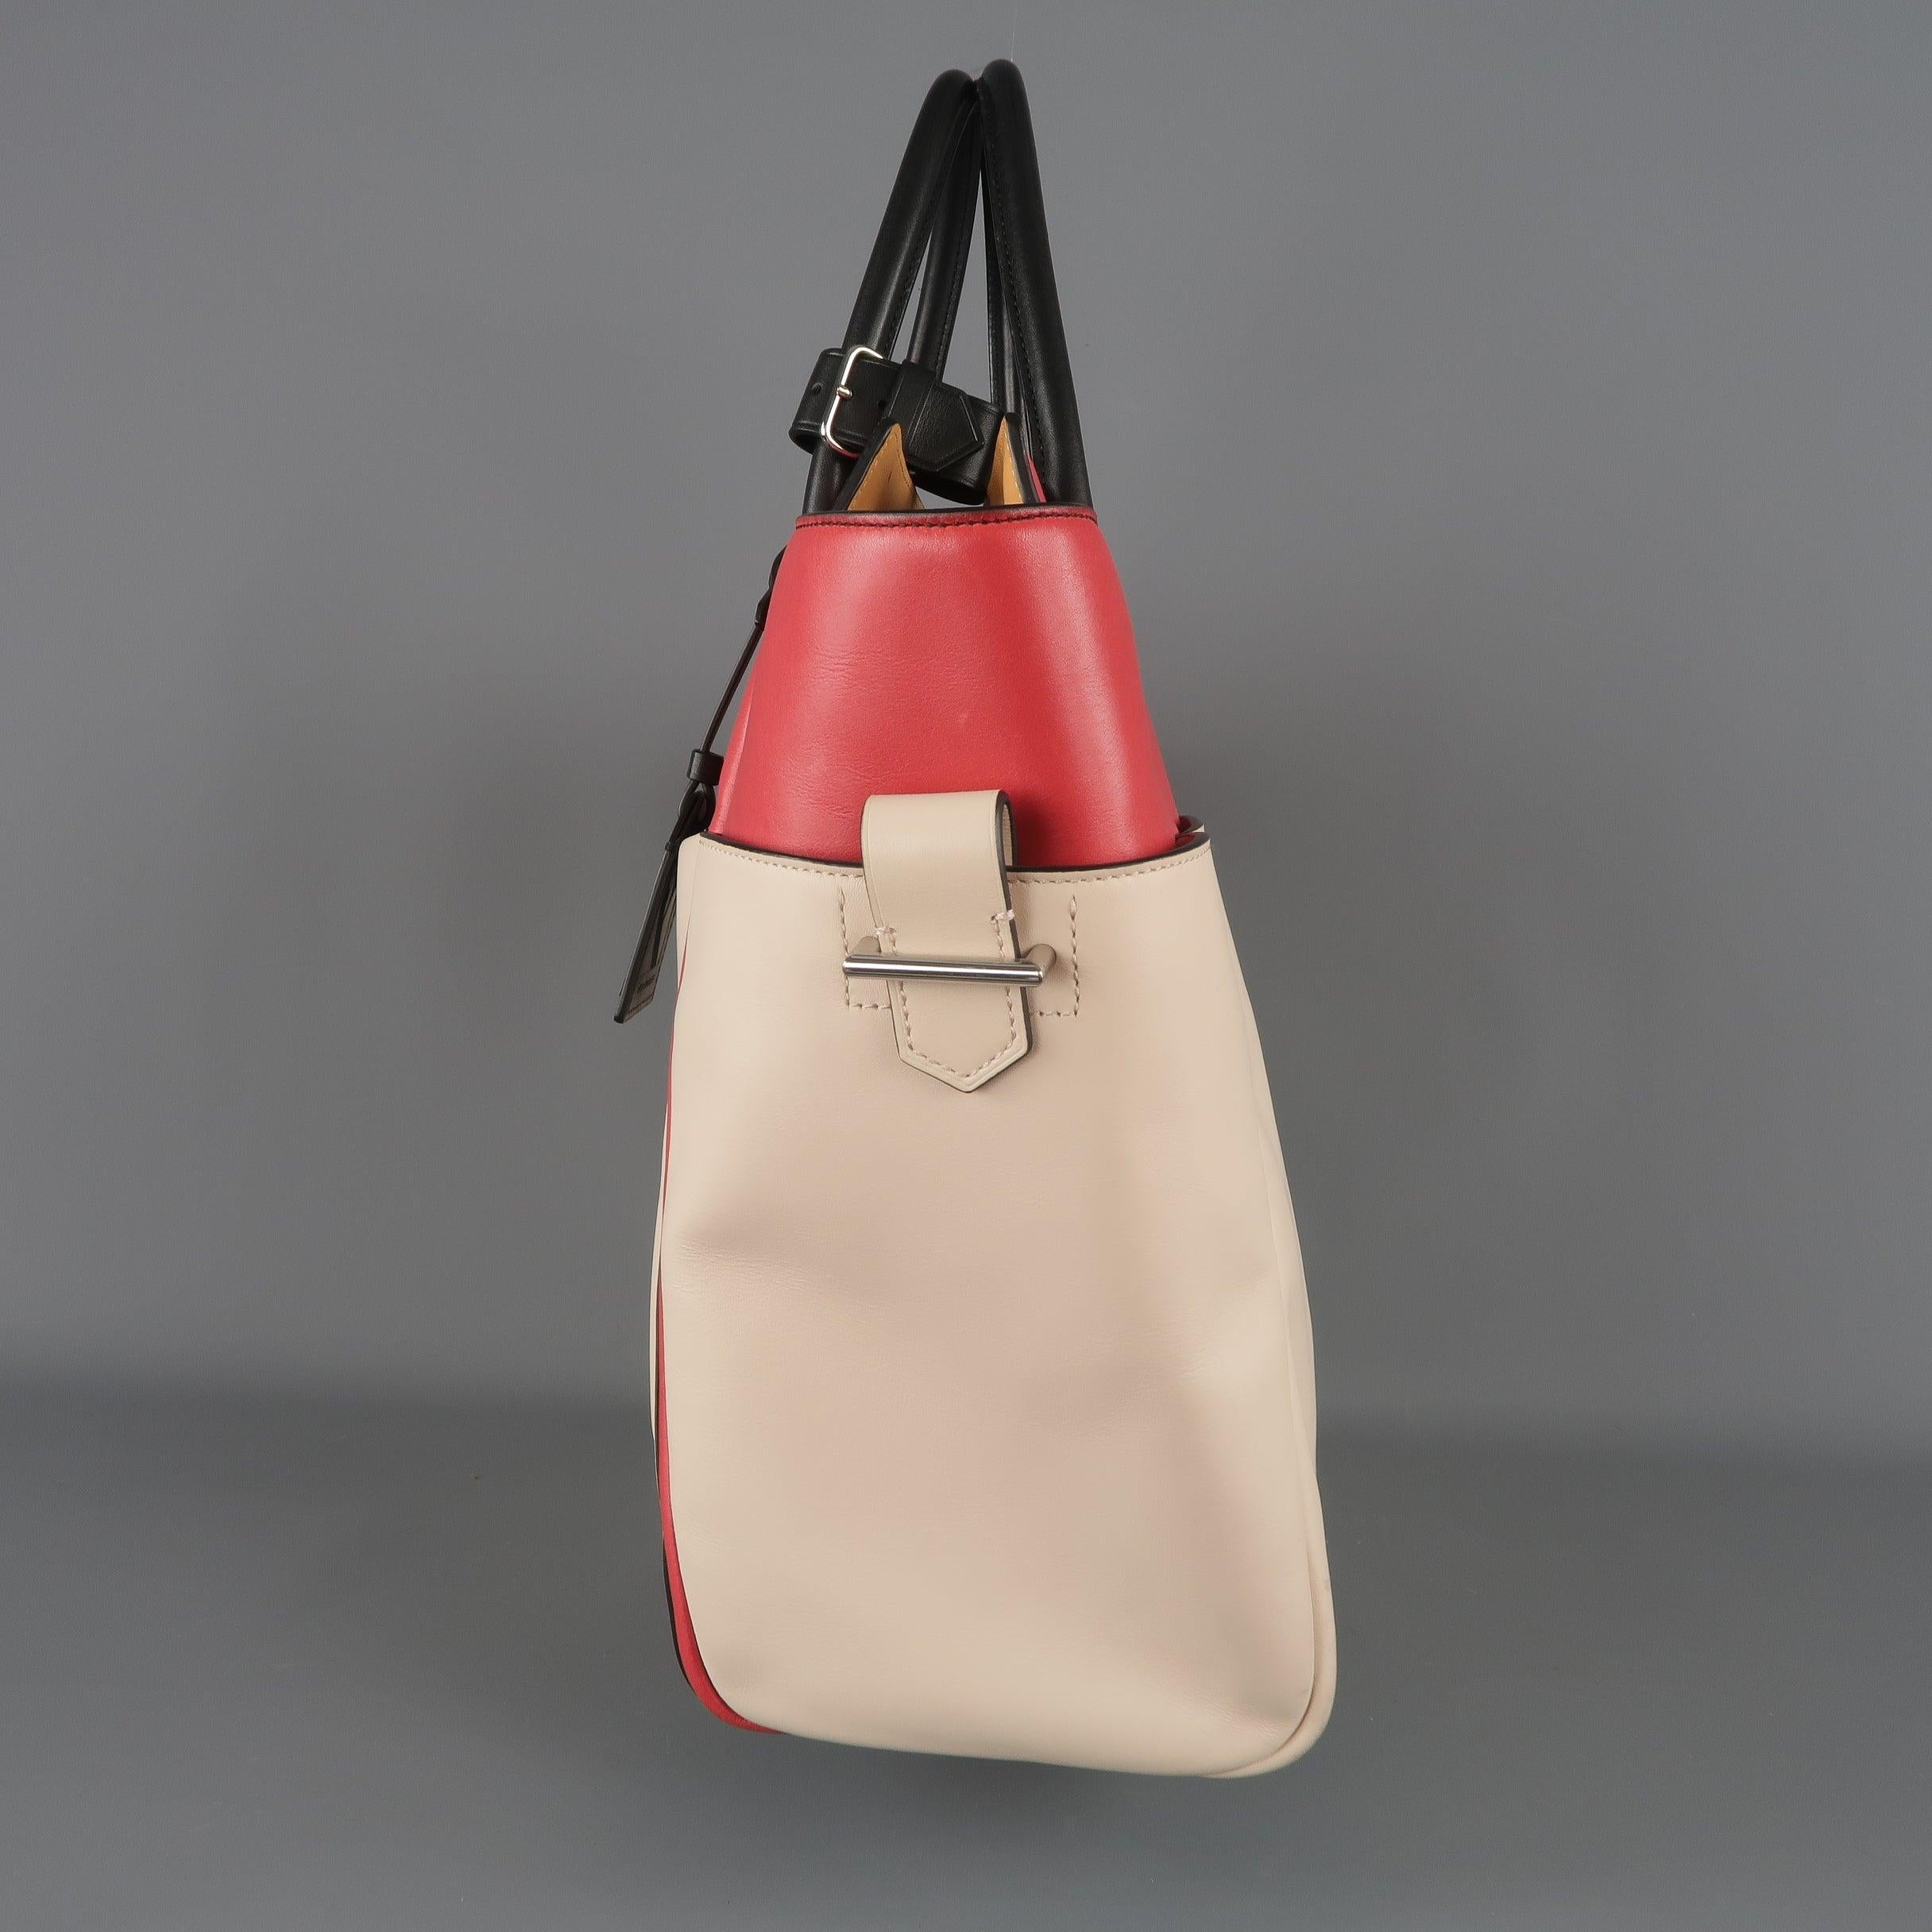 REED KRAKOFF Red Black & Light Pink Leather Tote Handbag In Good Condition For Sale In San Francisco, CA